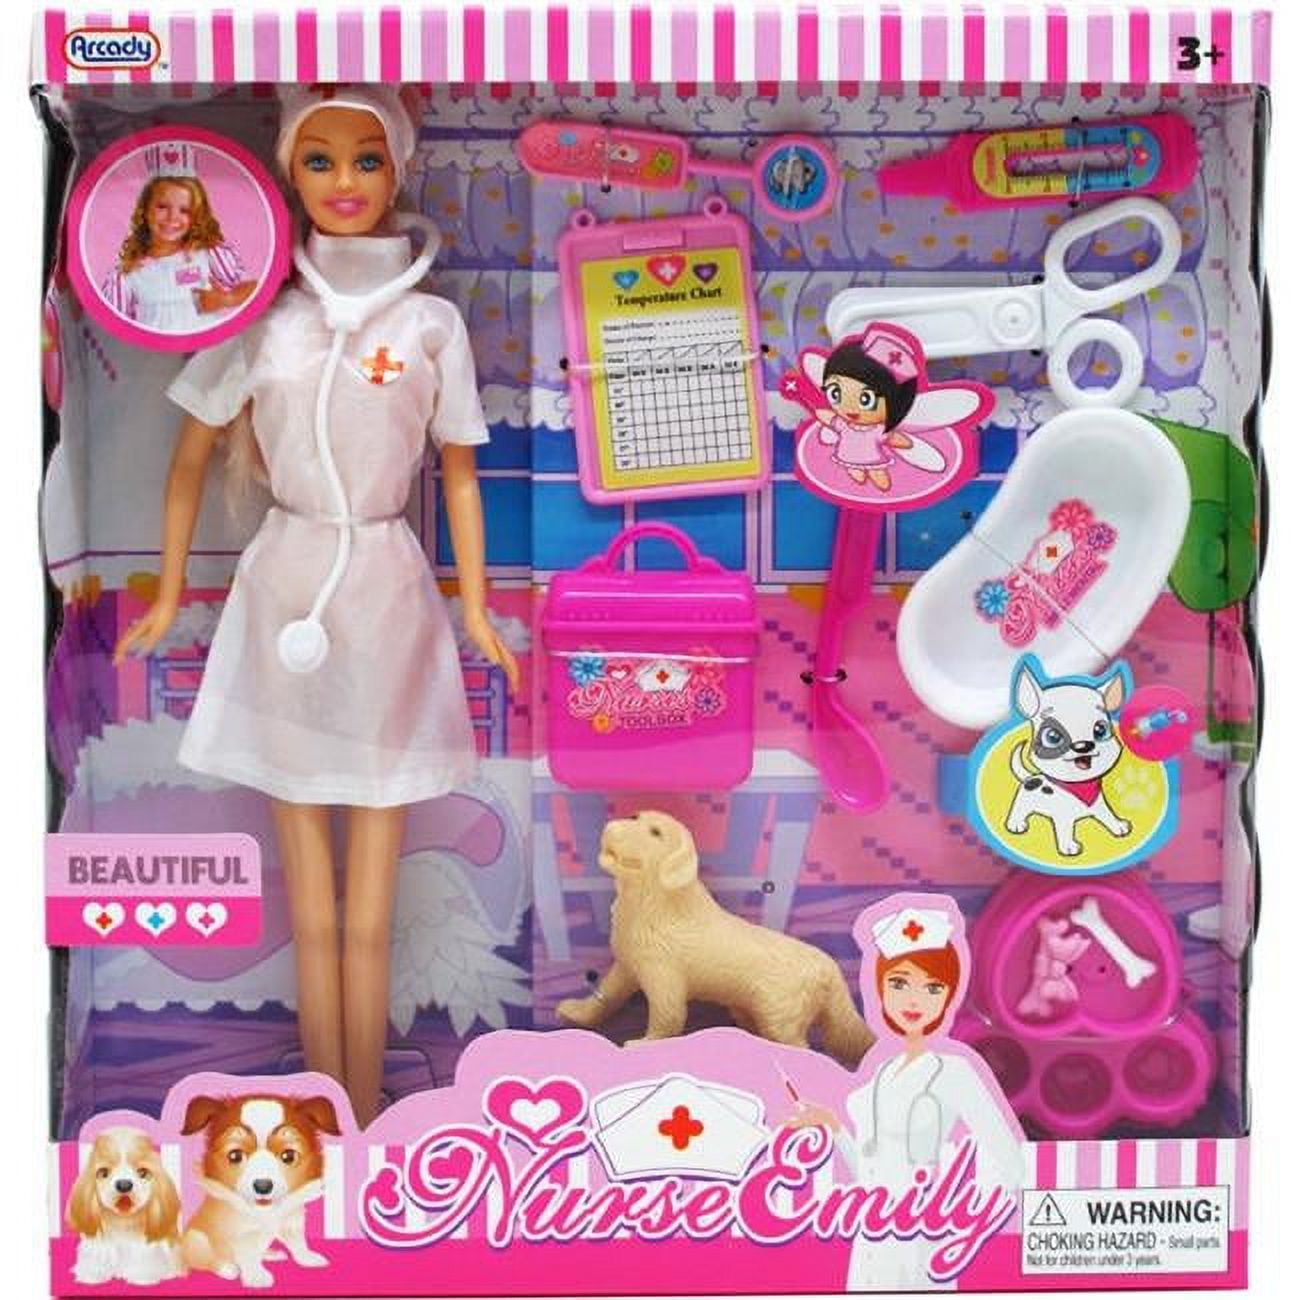 Picture of DDI 2339749 11.5 in. Nurse Emily Doll with Pet & Accessories - Case of 12